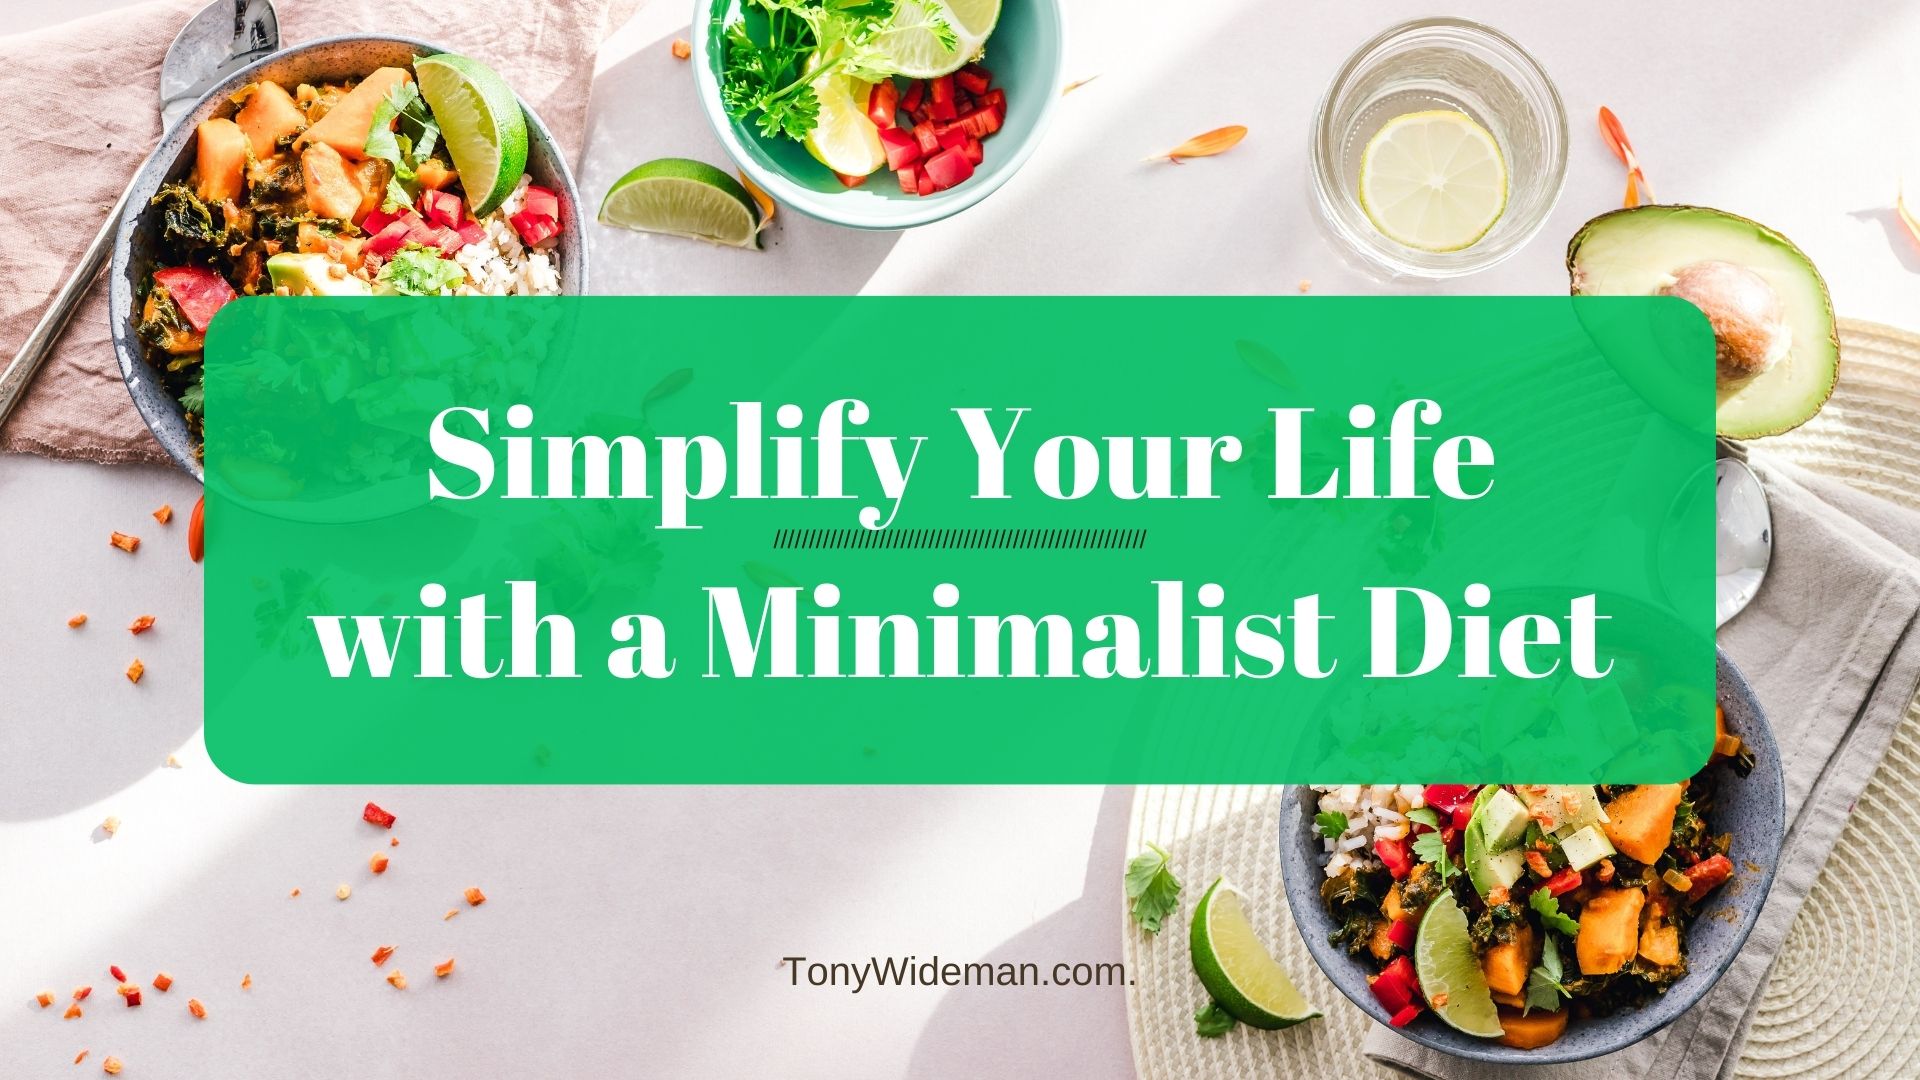 Simplify Your Life with a Minimalist Diet